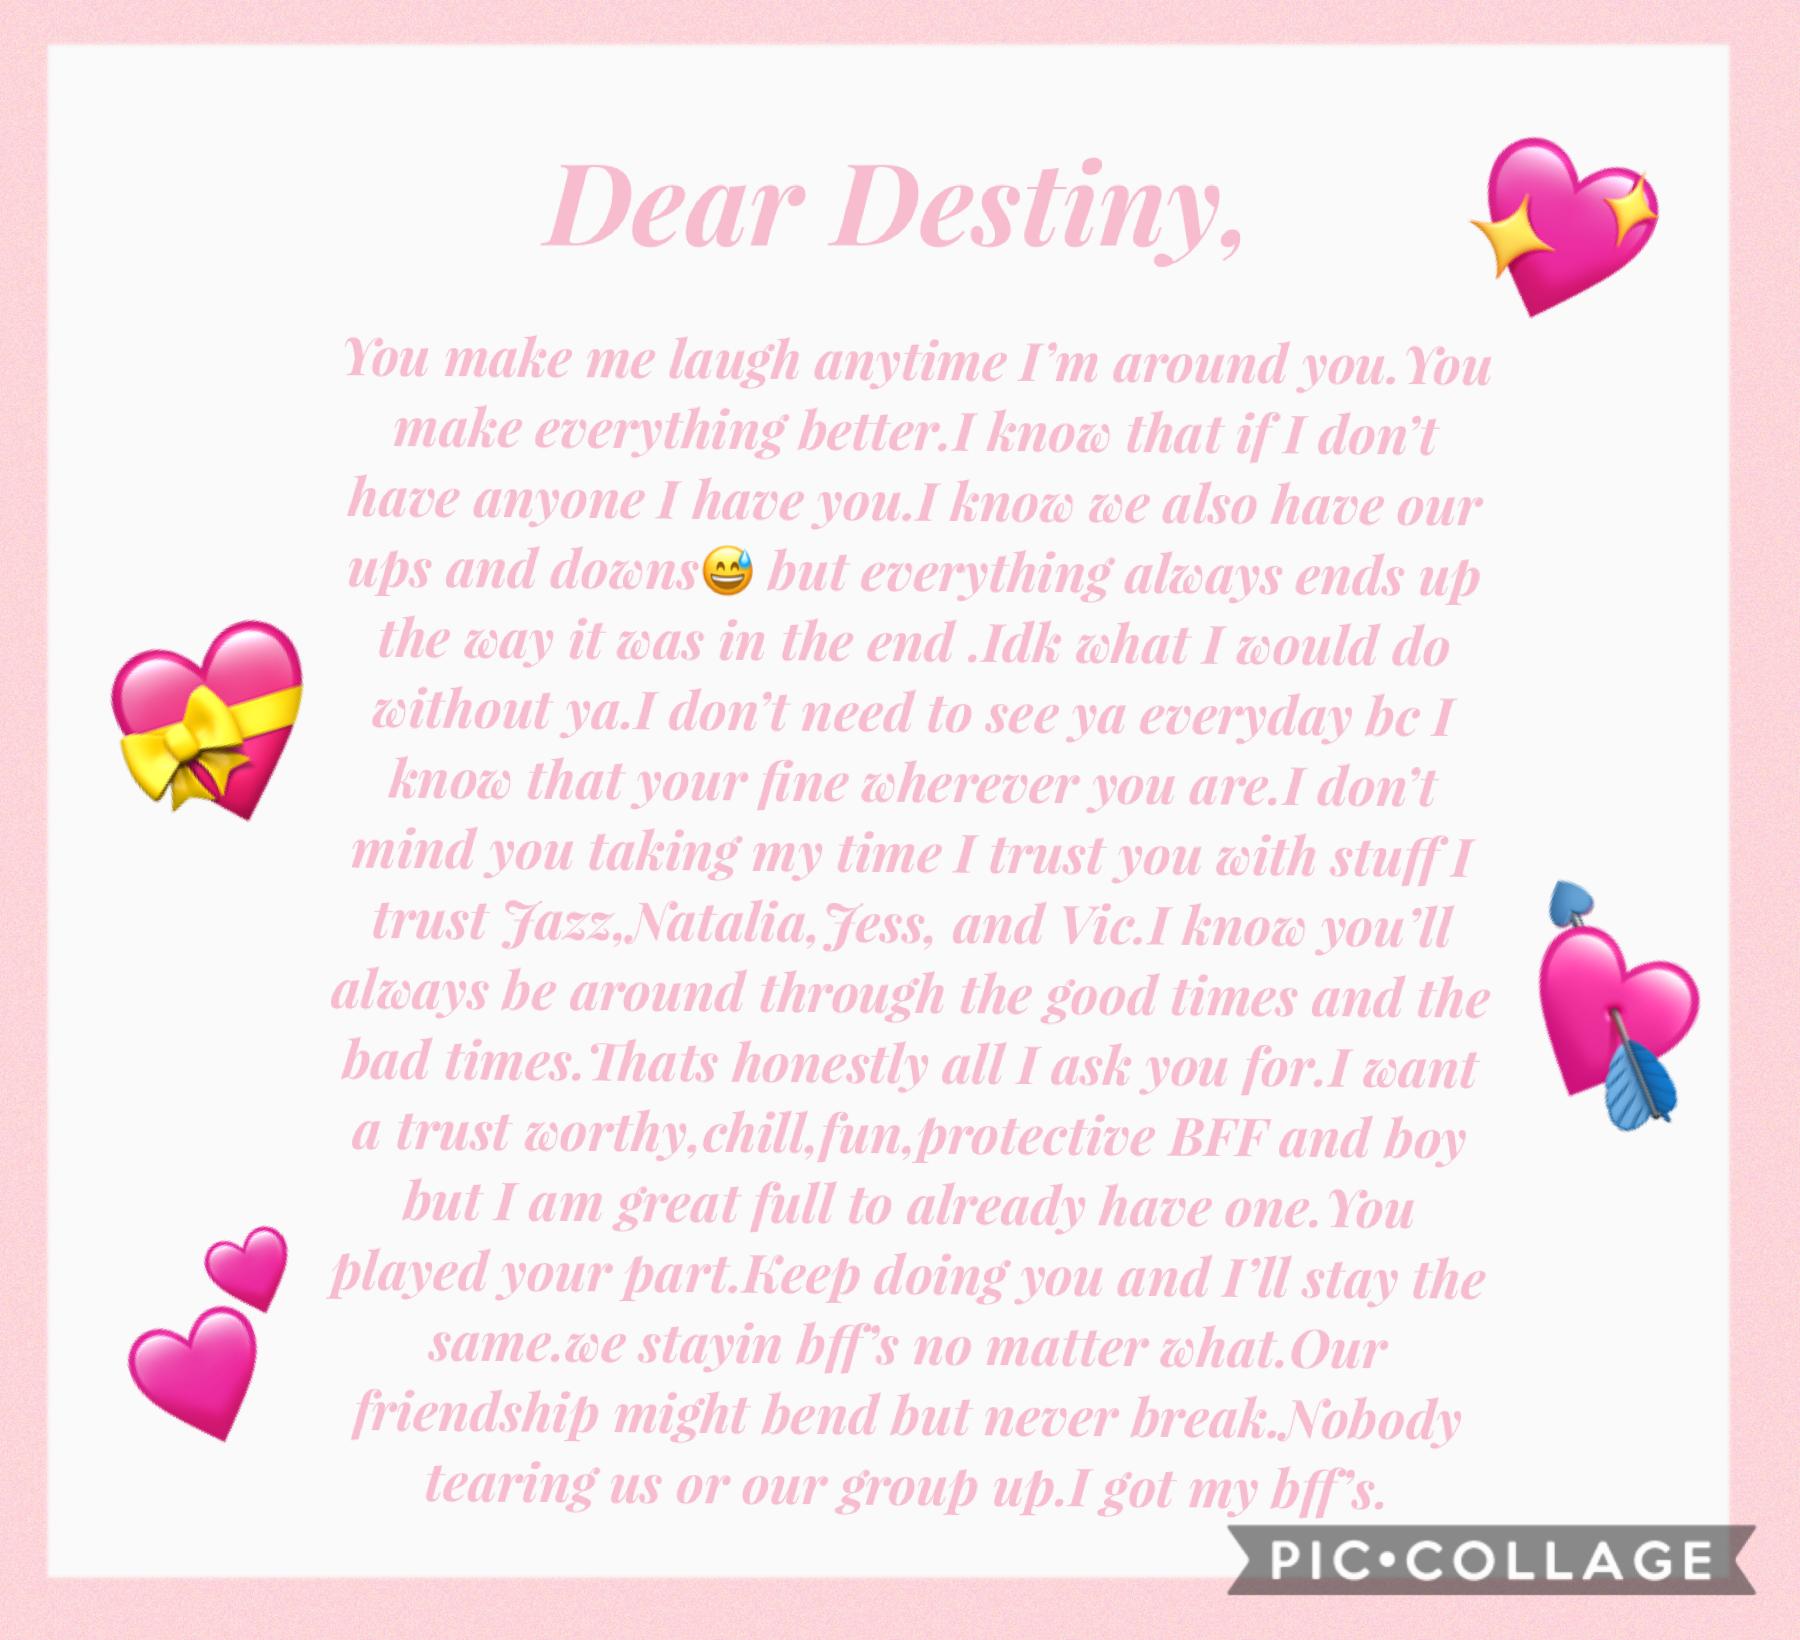 This is for Destiny💖